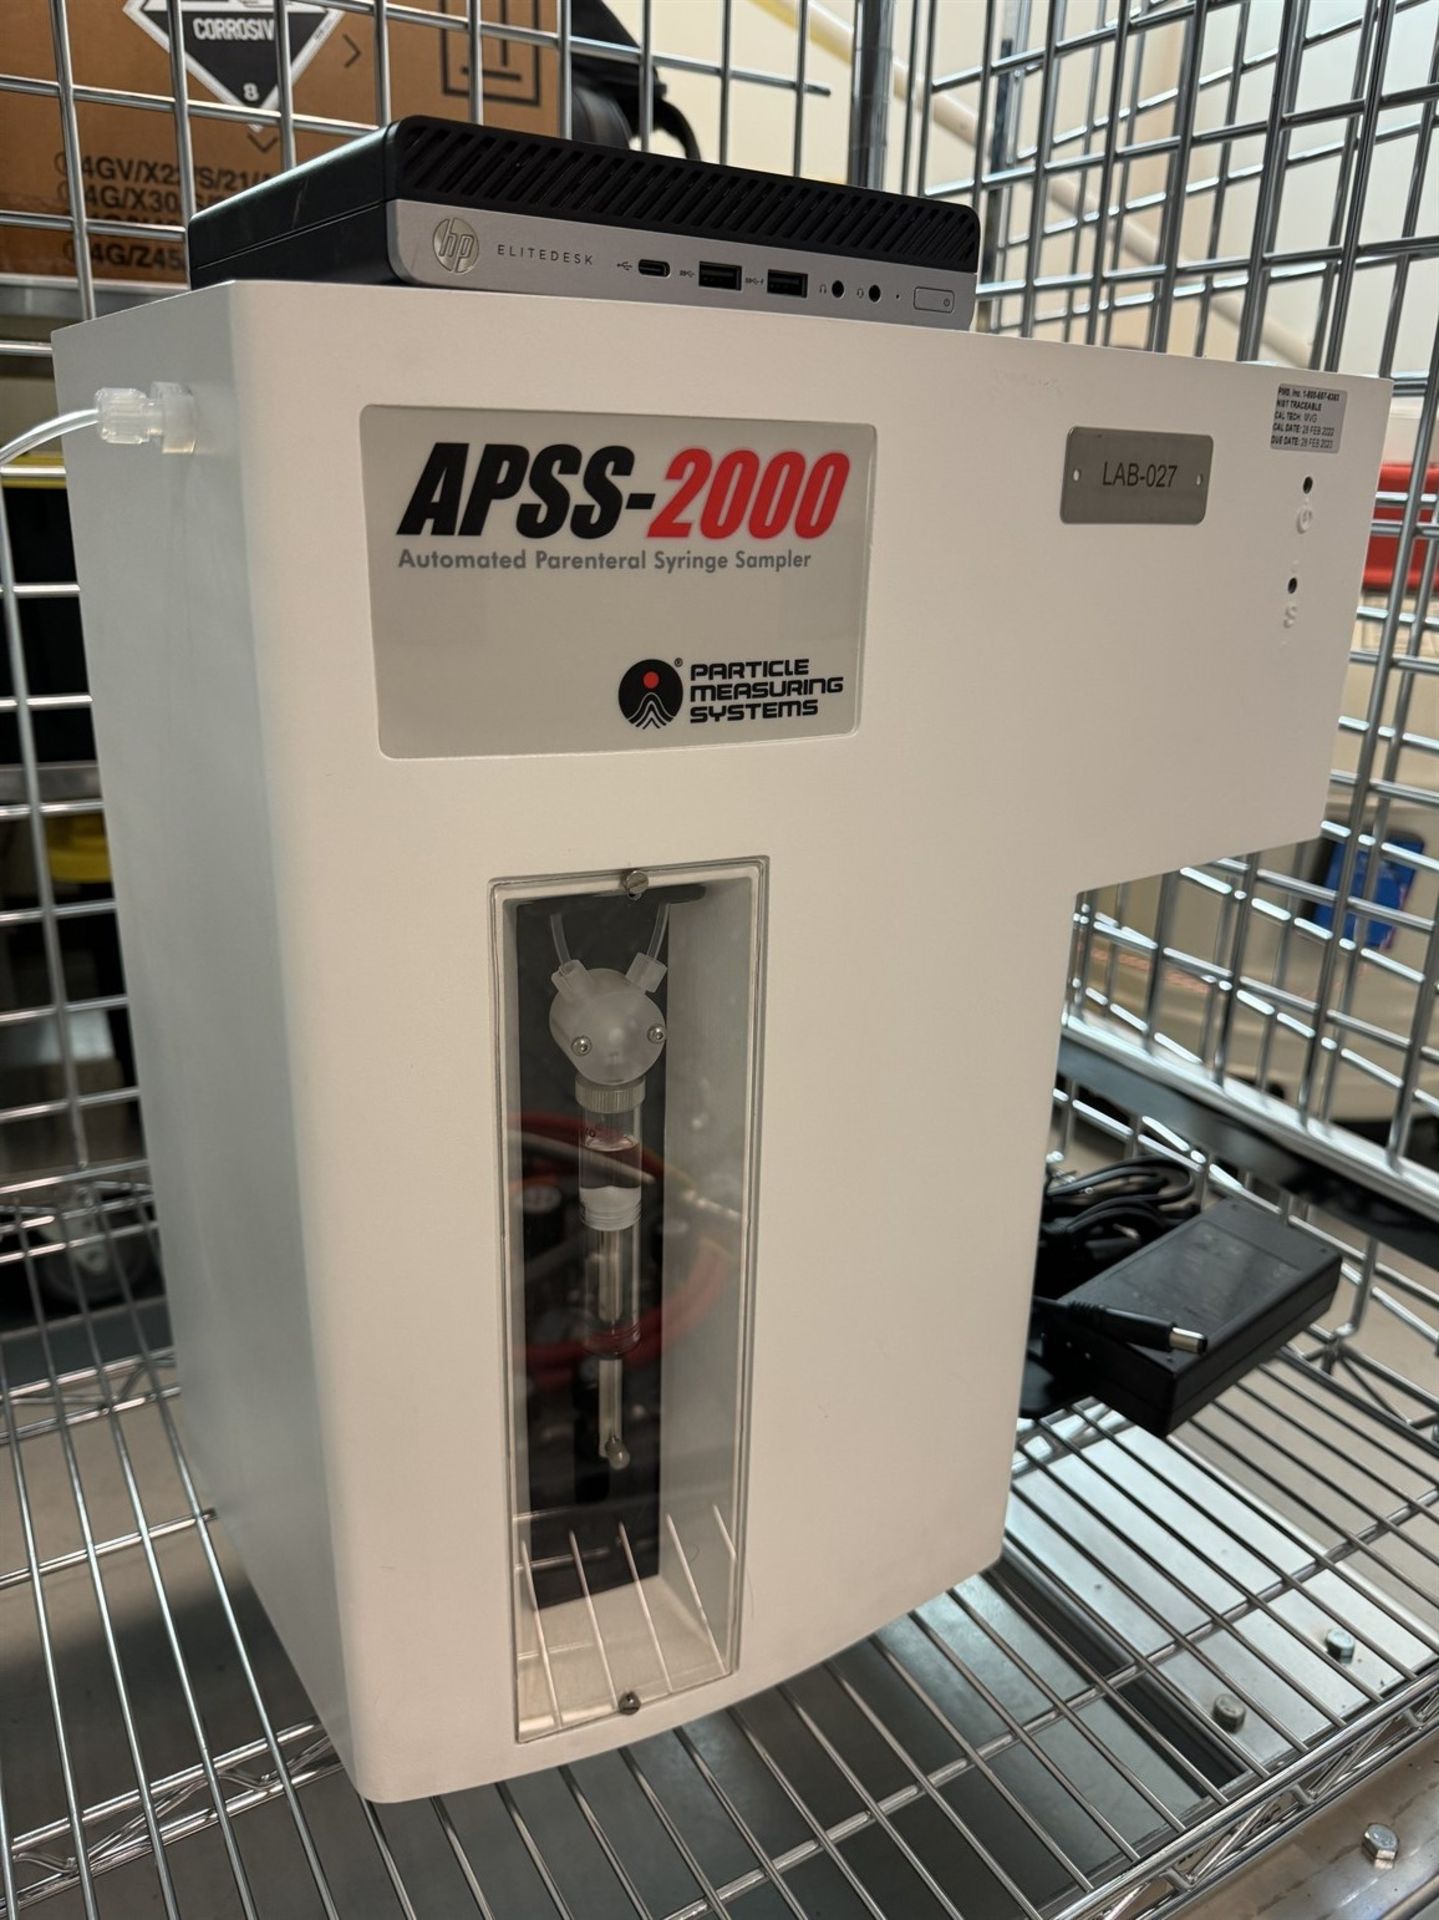 PARTICLE MEASURING SYSTEMS APSS-2000 Automated Parenteral Syringe Sampler, s/n 98228 - Image 3 of 5